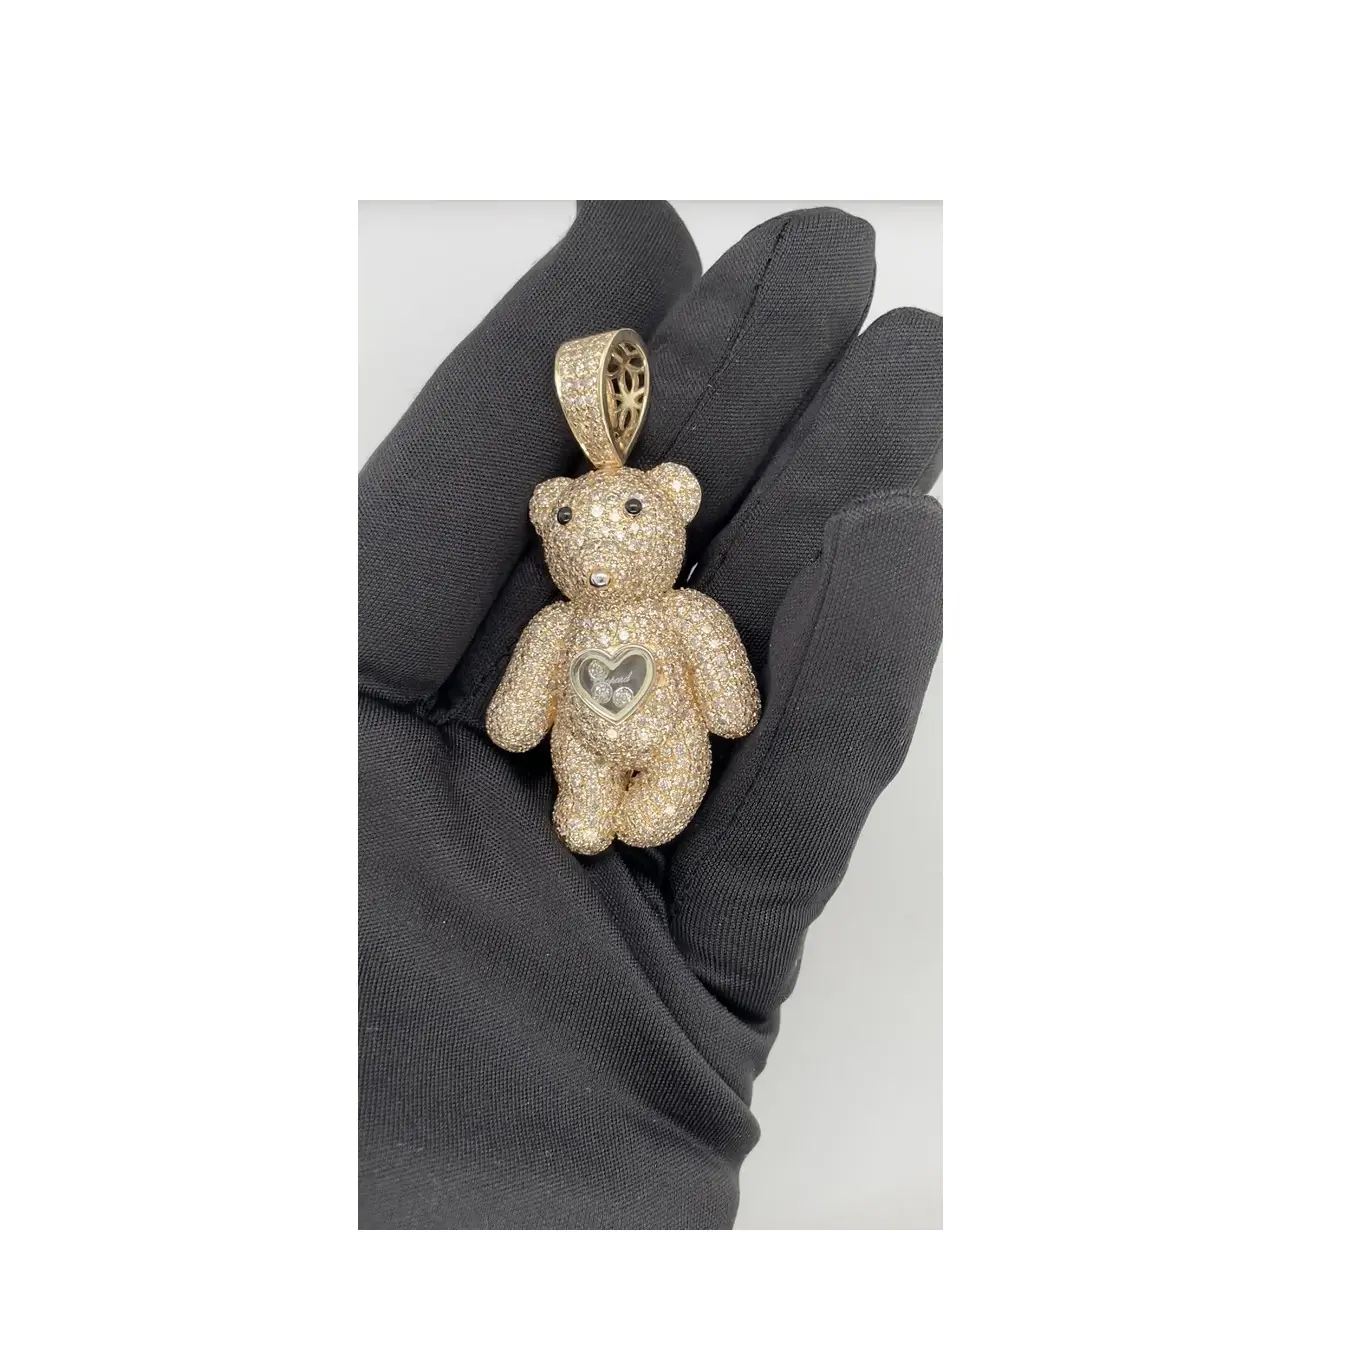 Most Selling Hip Hop Style 10 Kt Teddy Bear Pendant for Women Party and Wedding Use Jewellery with 3.75 Natural Diamond